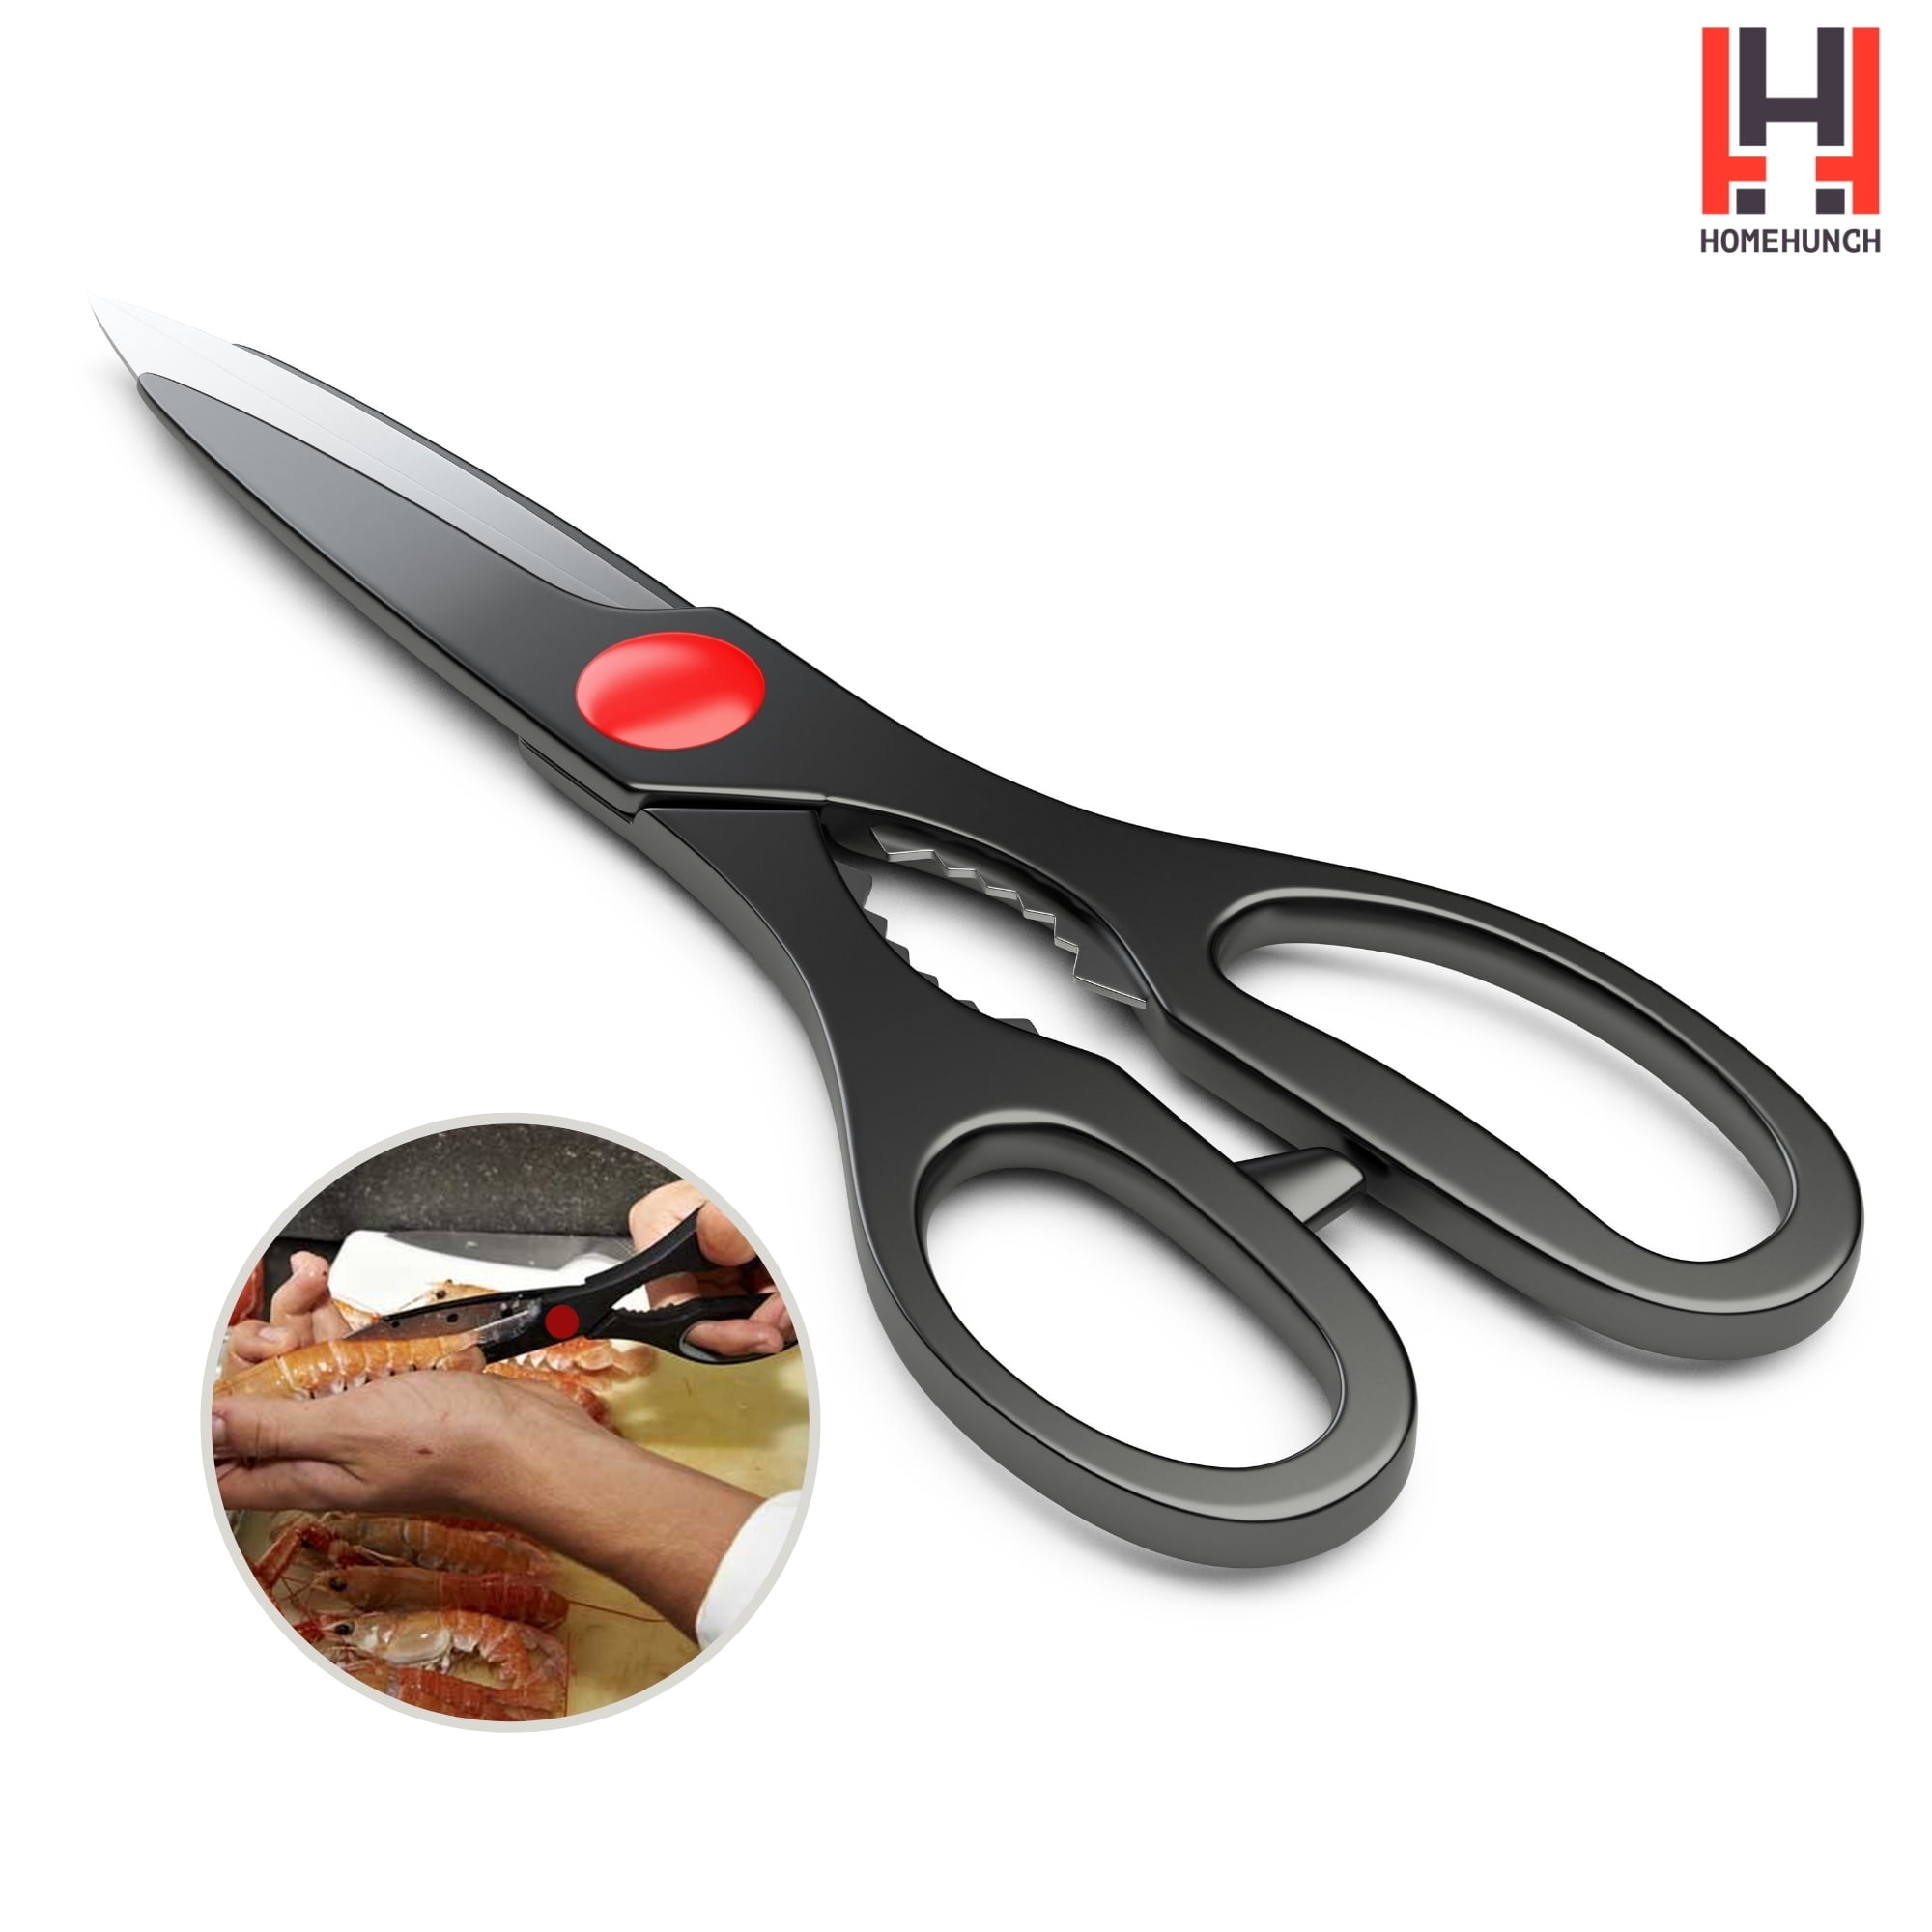 Tovolo Elements Heavy Duty Kitchen Shears with Sheath for Food Prep  Trimming Meat and Vegetables, Small, Charcoal, Blueberry